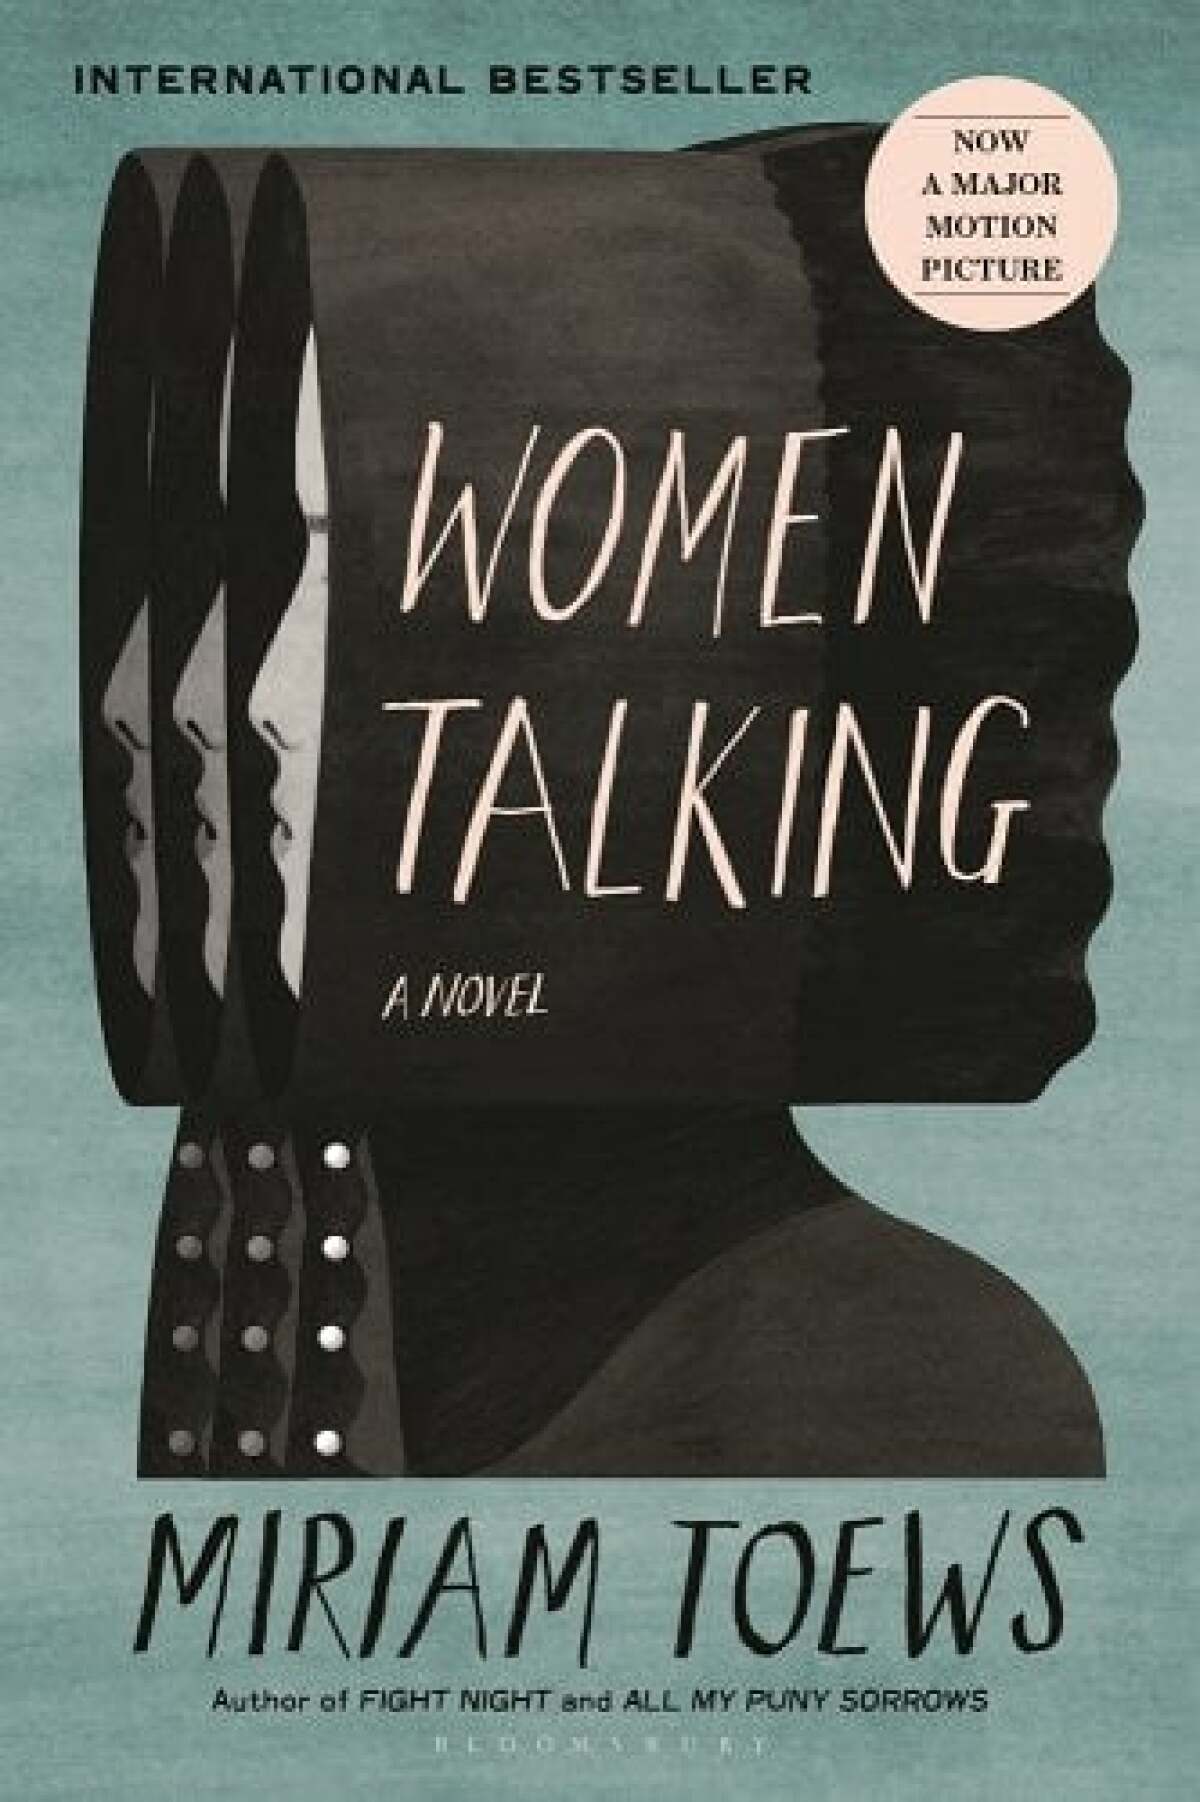 The cover of 'Women Talking' by Miriam Toews